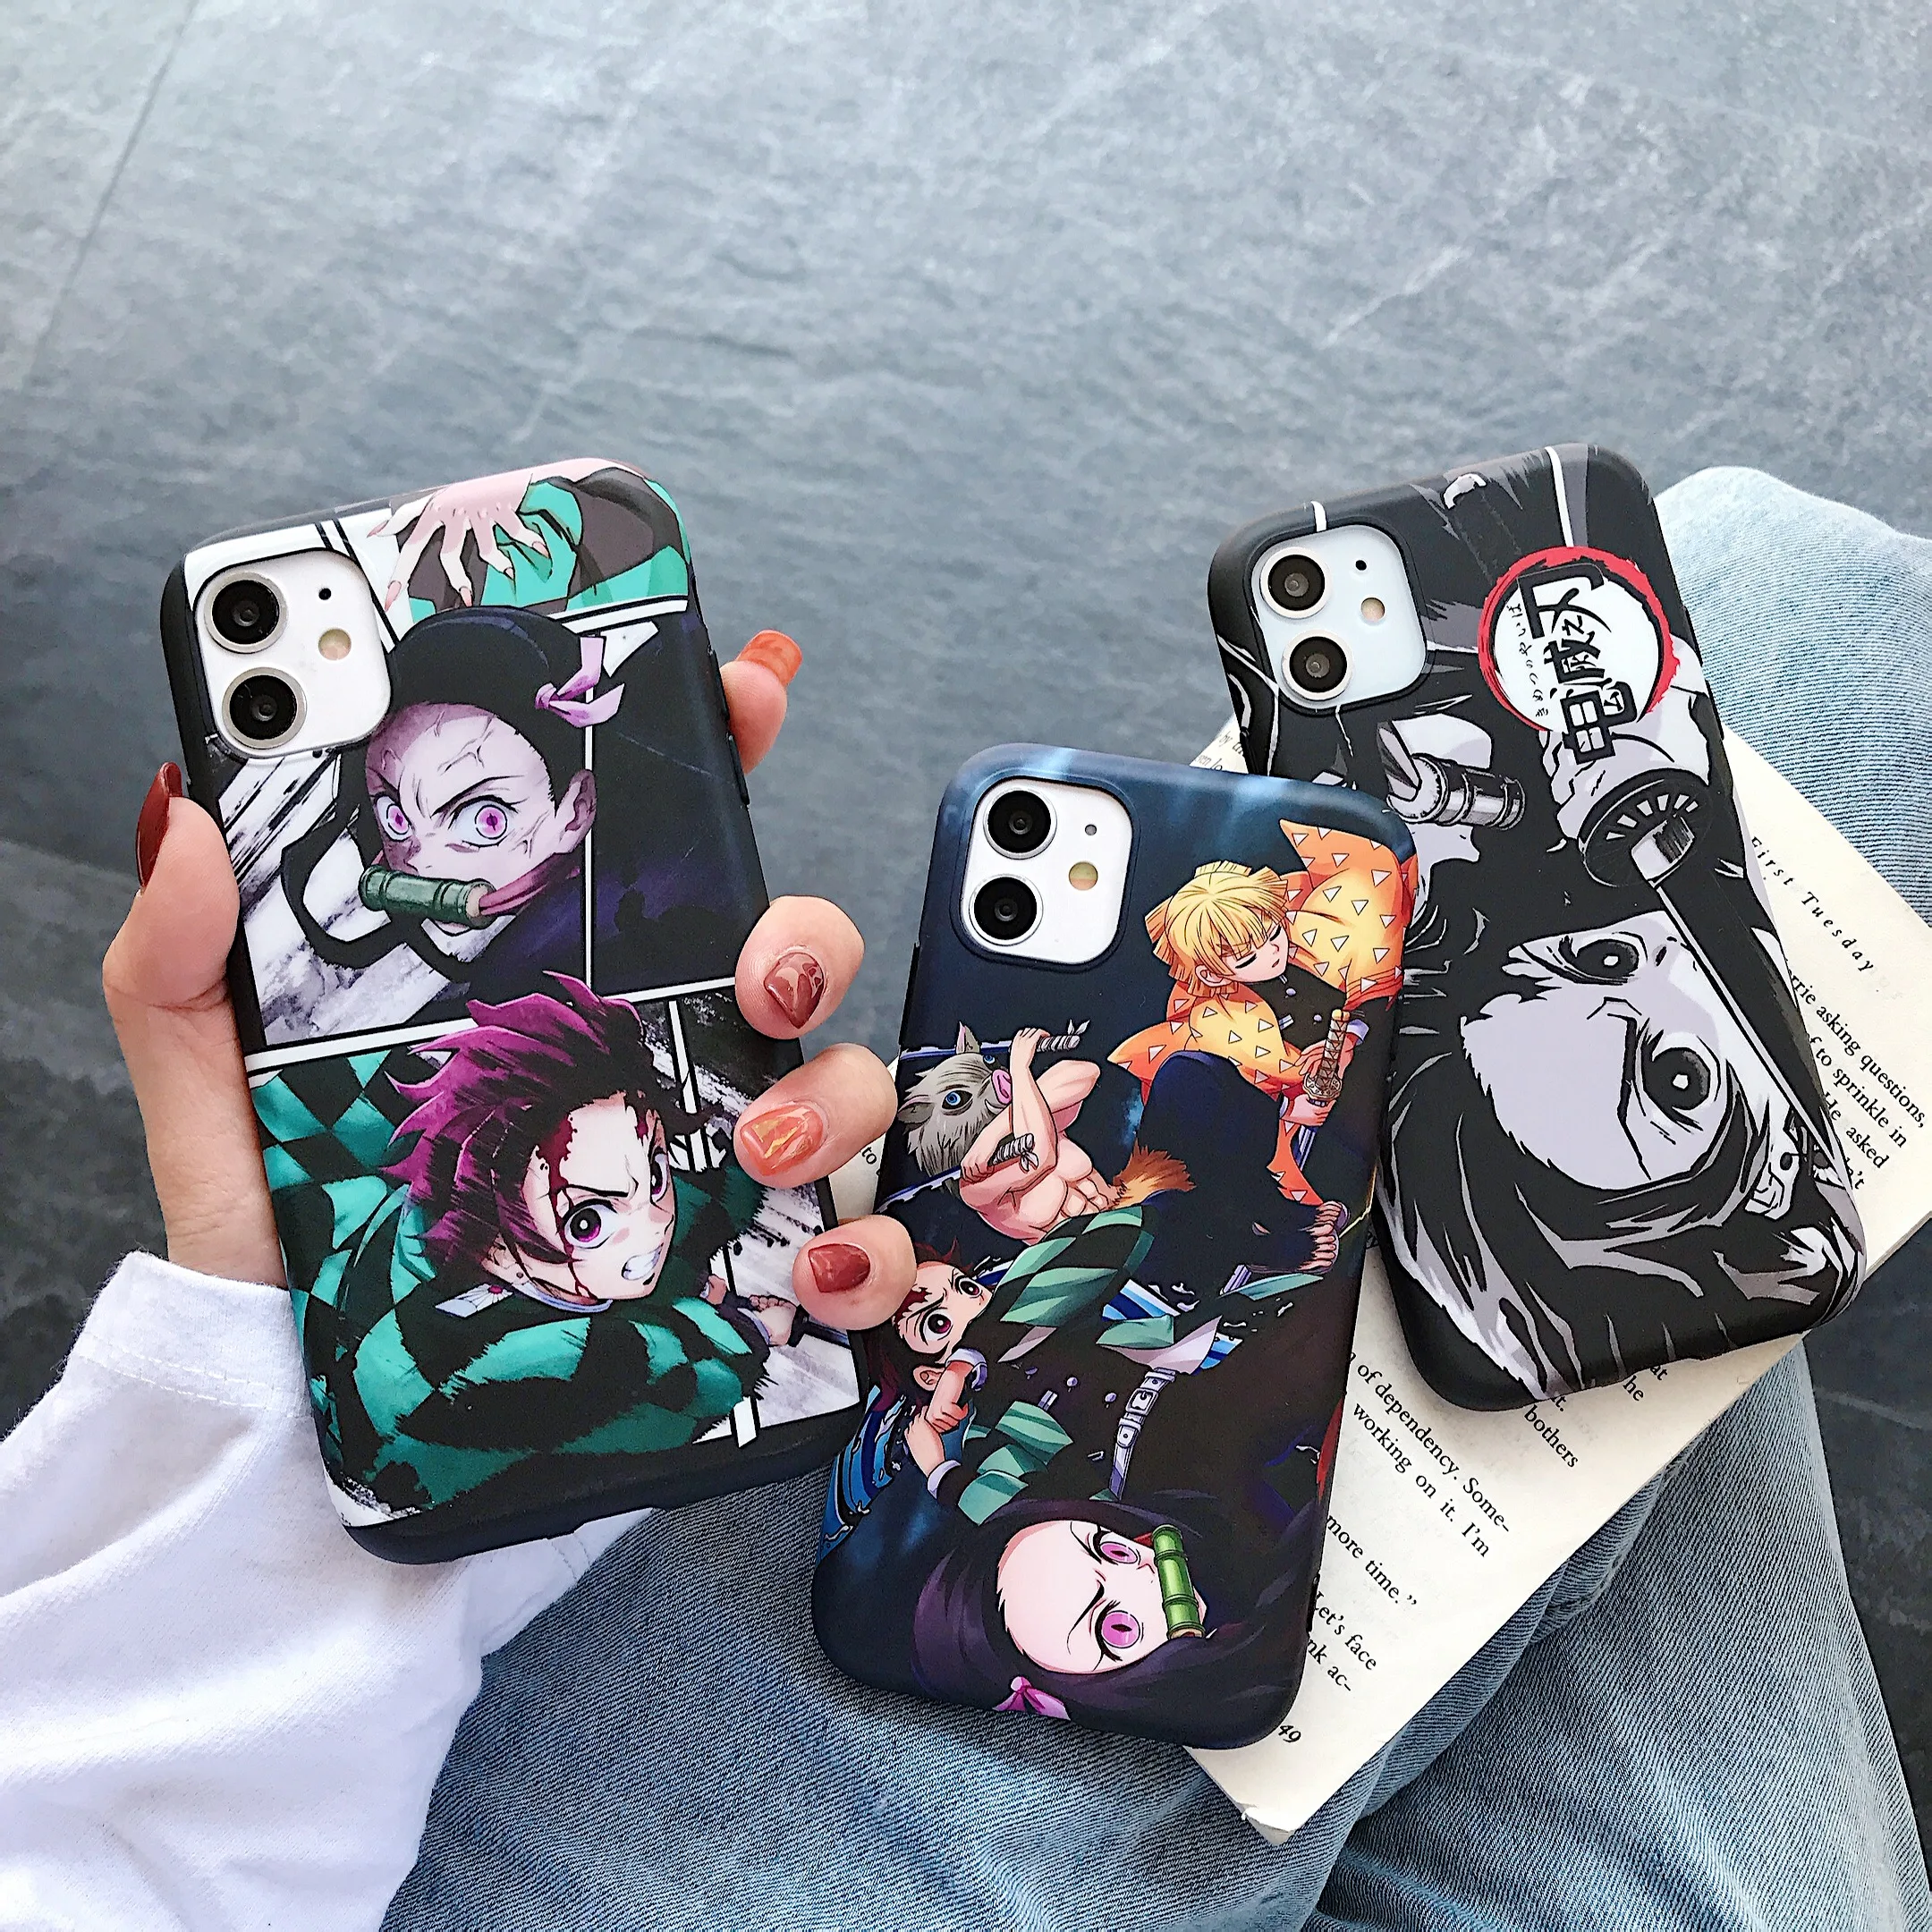 Cute Japan Demon Slayer Case For Iphone 11 12 13 Pro 7 8Plus X XR XS Max Phone Cases Anime Kimetsu No Yaiba Soft TPU Cover Coque iphone 13 pro max case clear